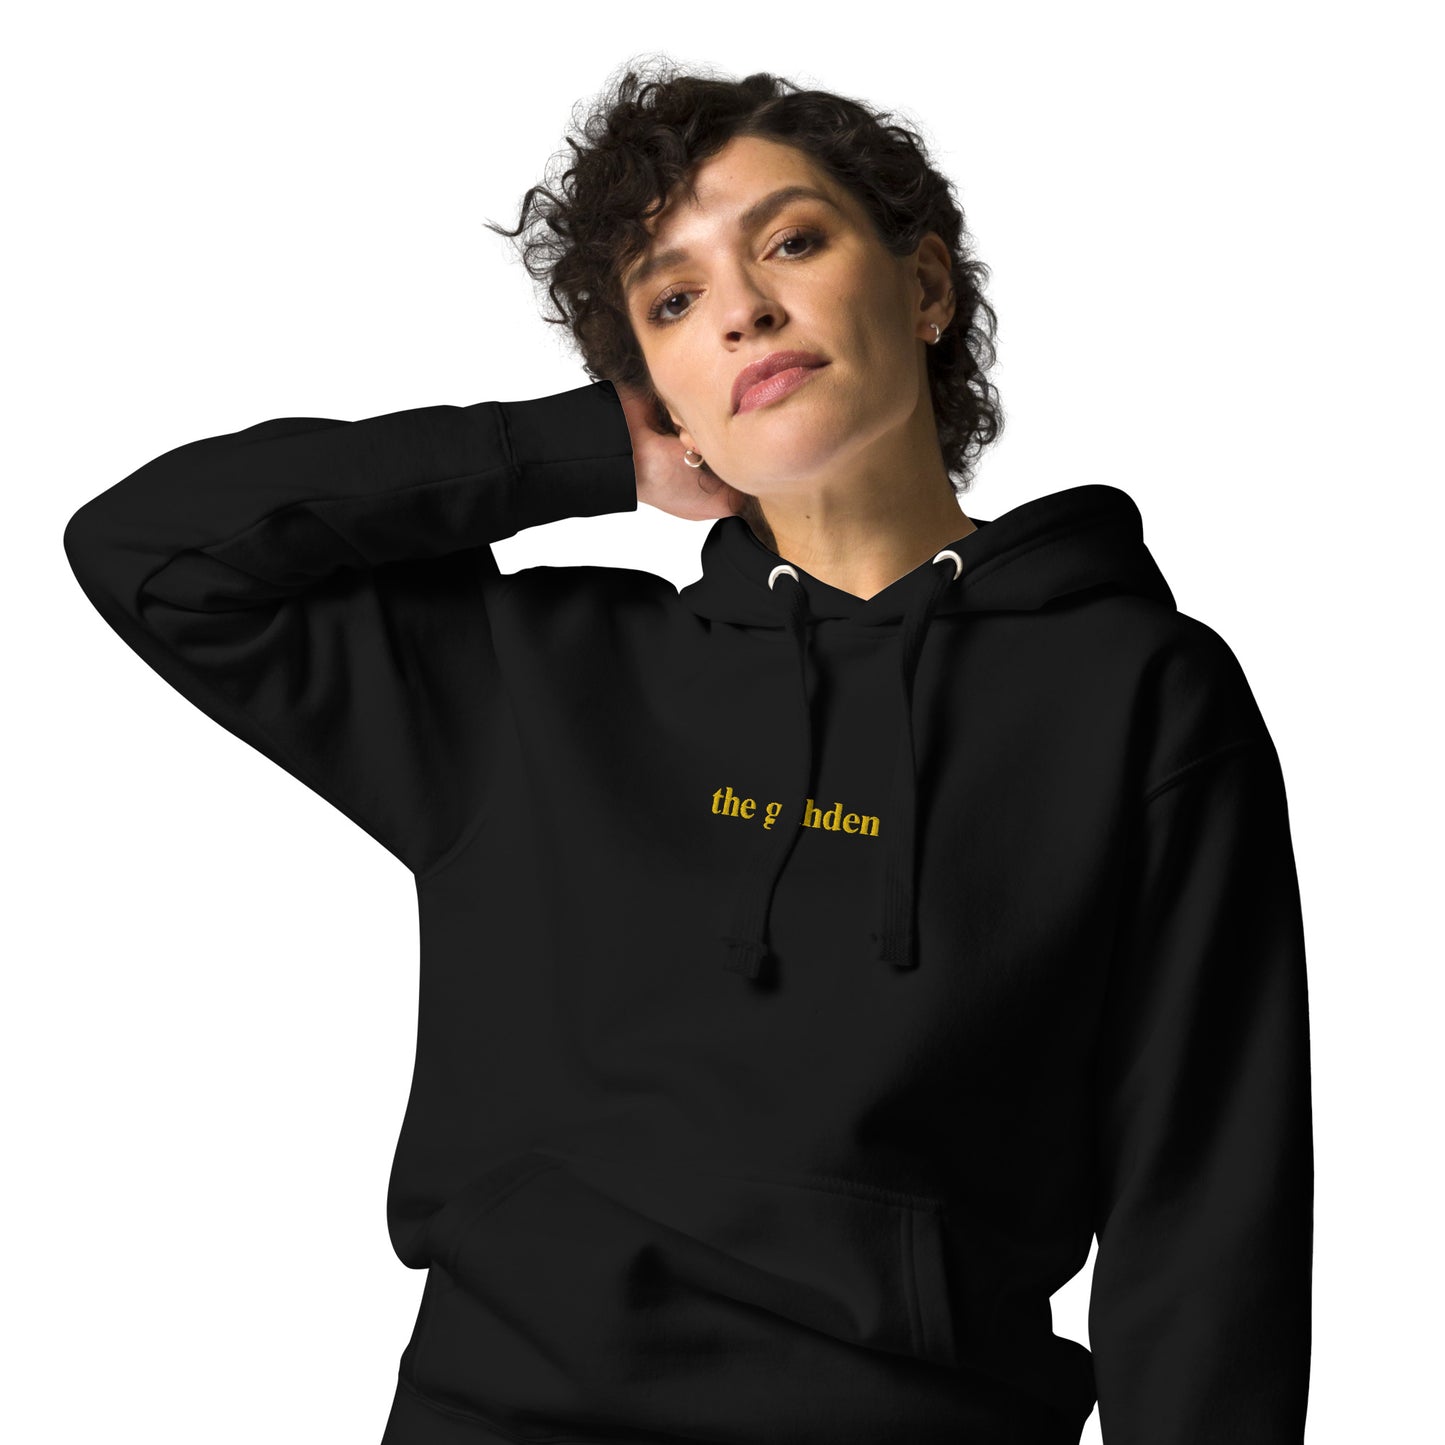 woman wearing black hoodie that says "the gahden" in gold embroidery